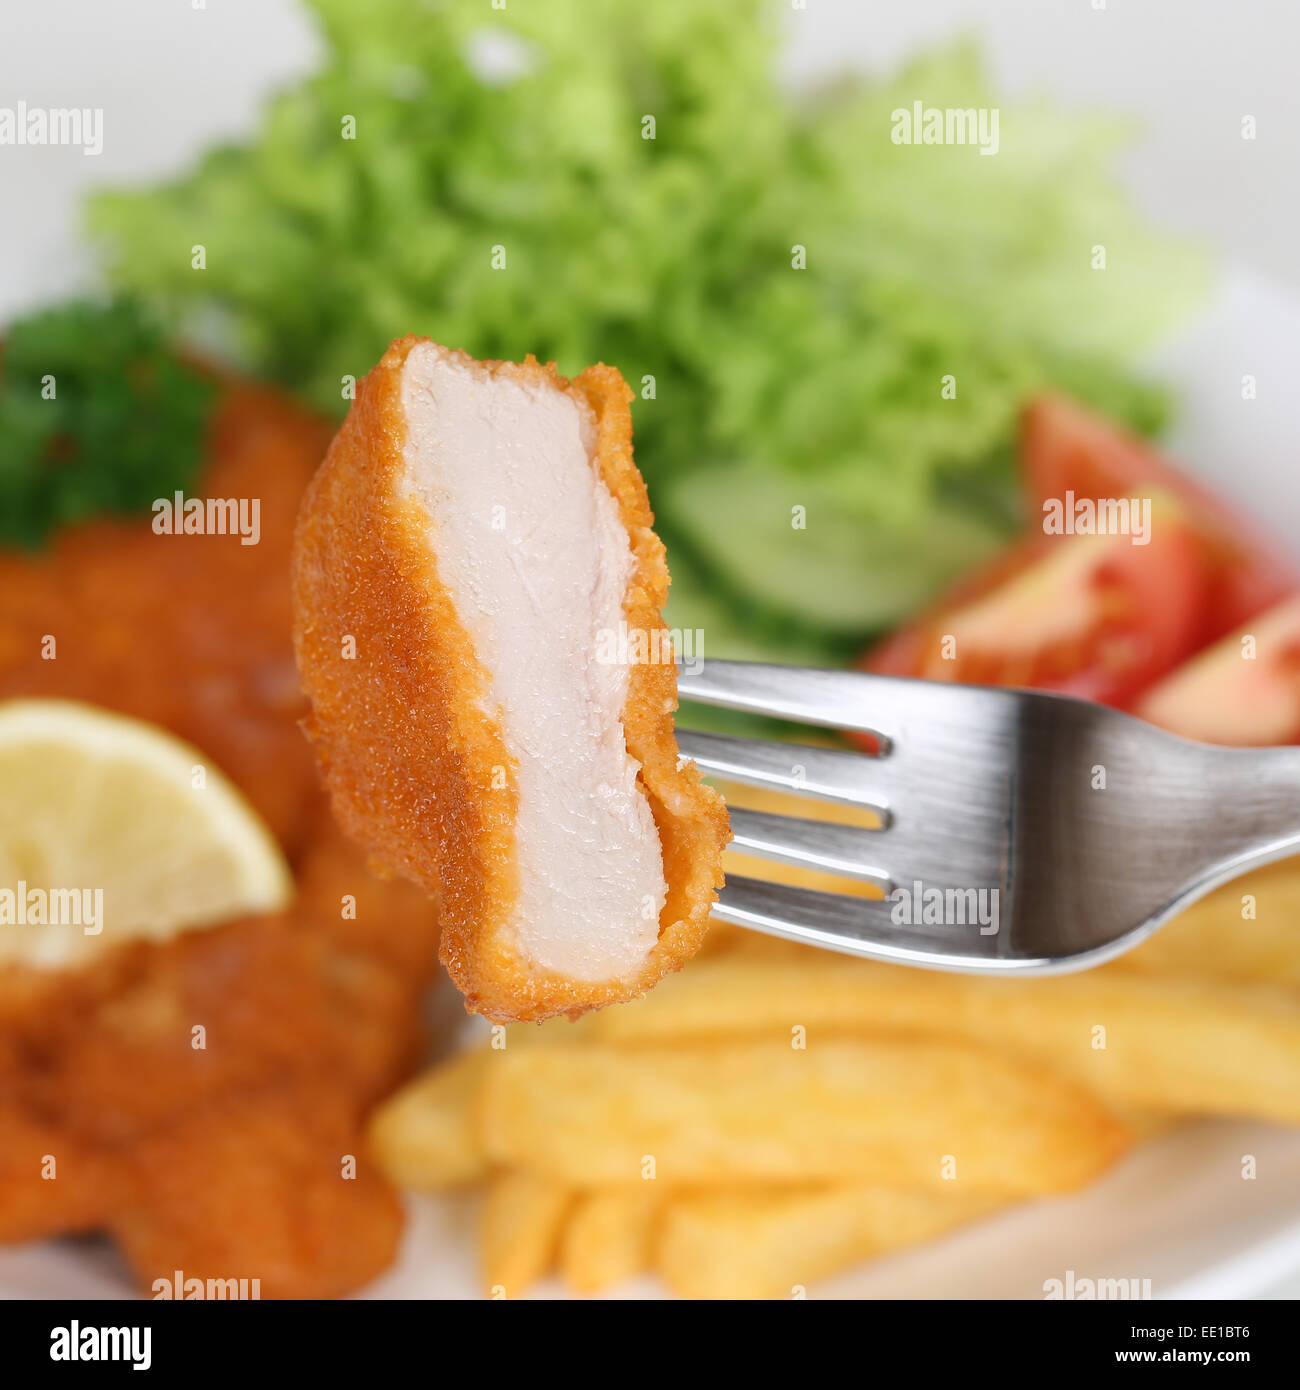 Eating Schnitzel chop cutlet steak with fork Stock Photo